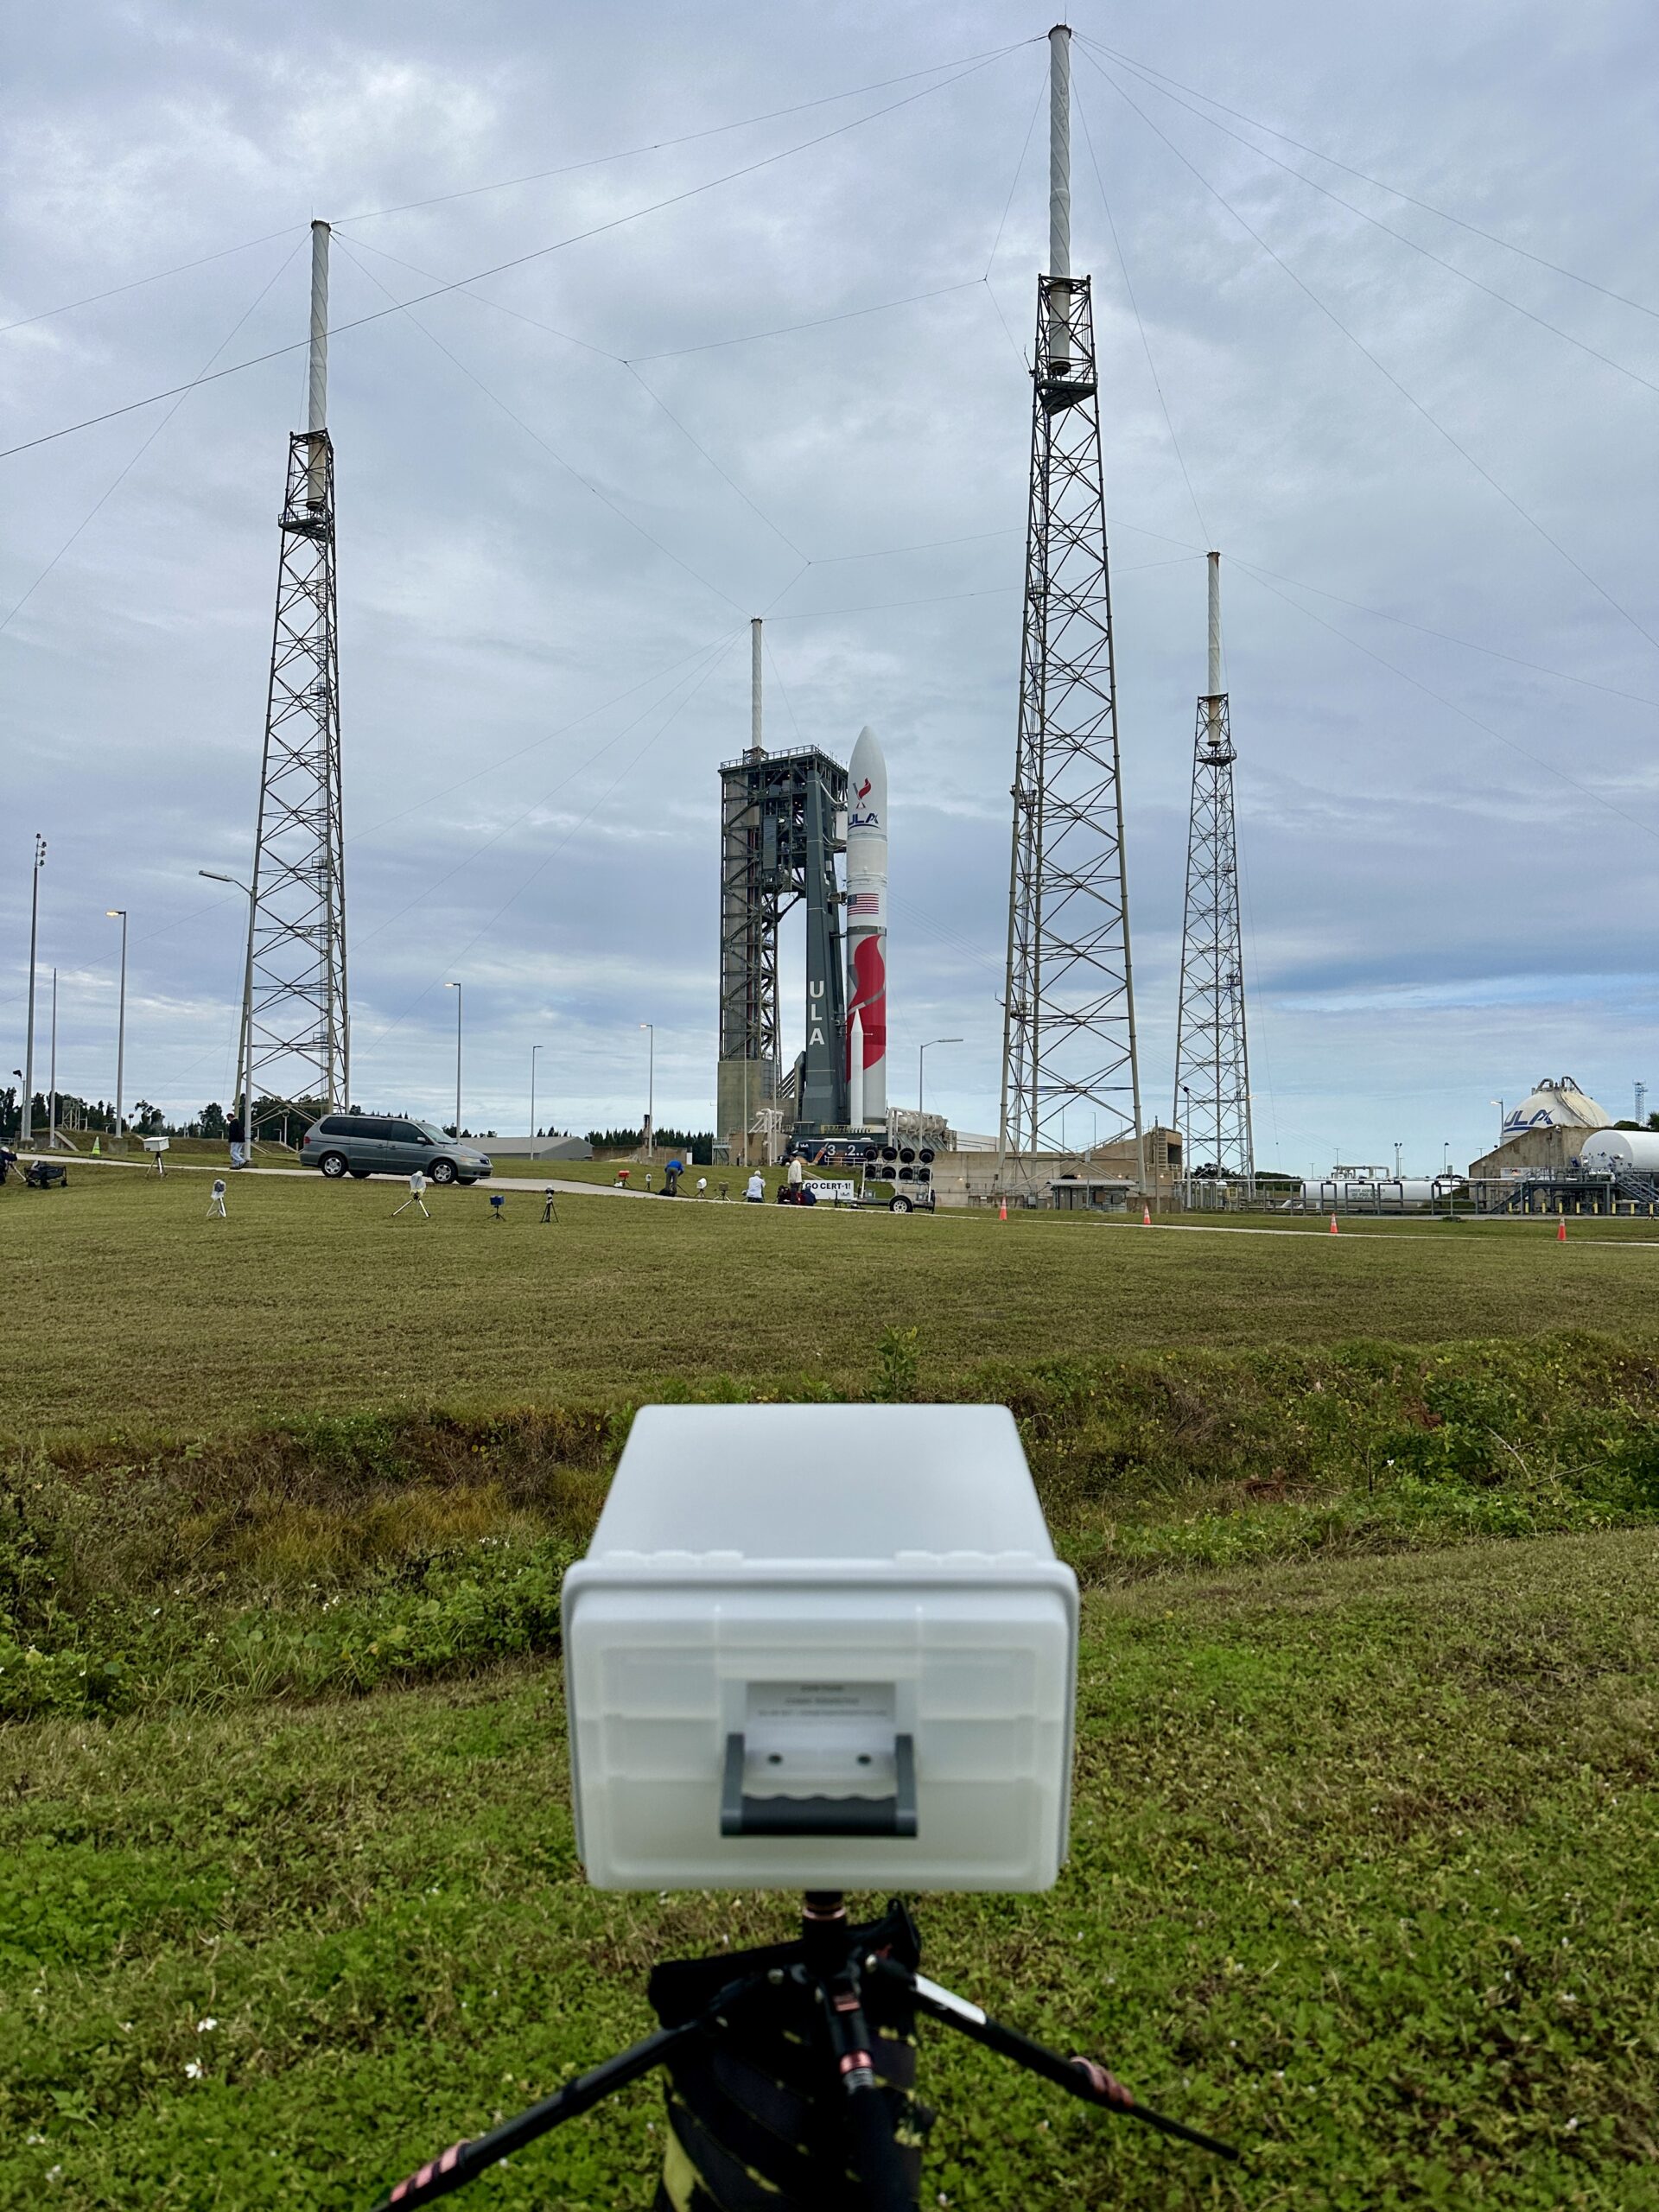 A white box on a tripod containing a Nikon DSLR is setup pointed towards the rocket at SLC-41.